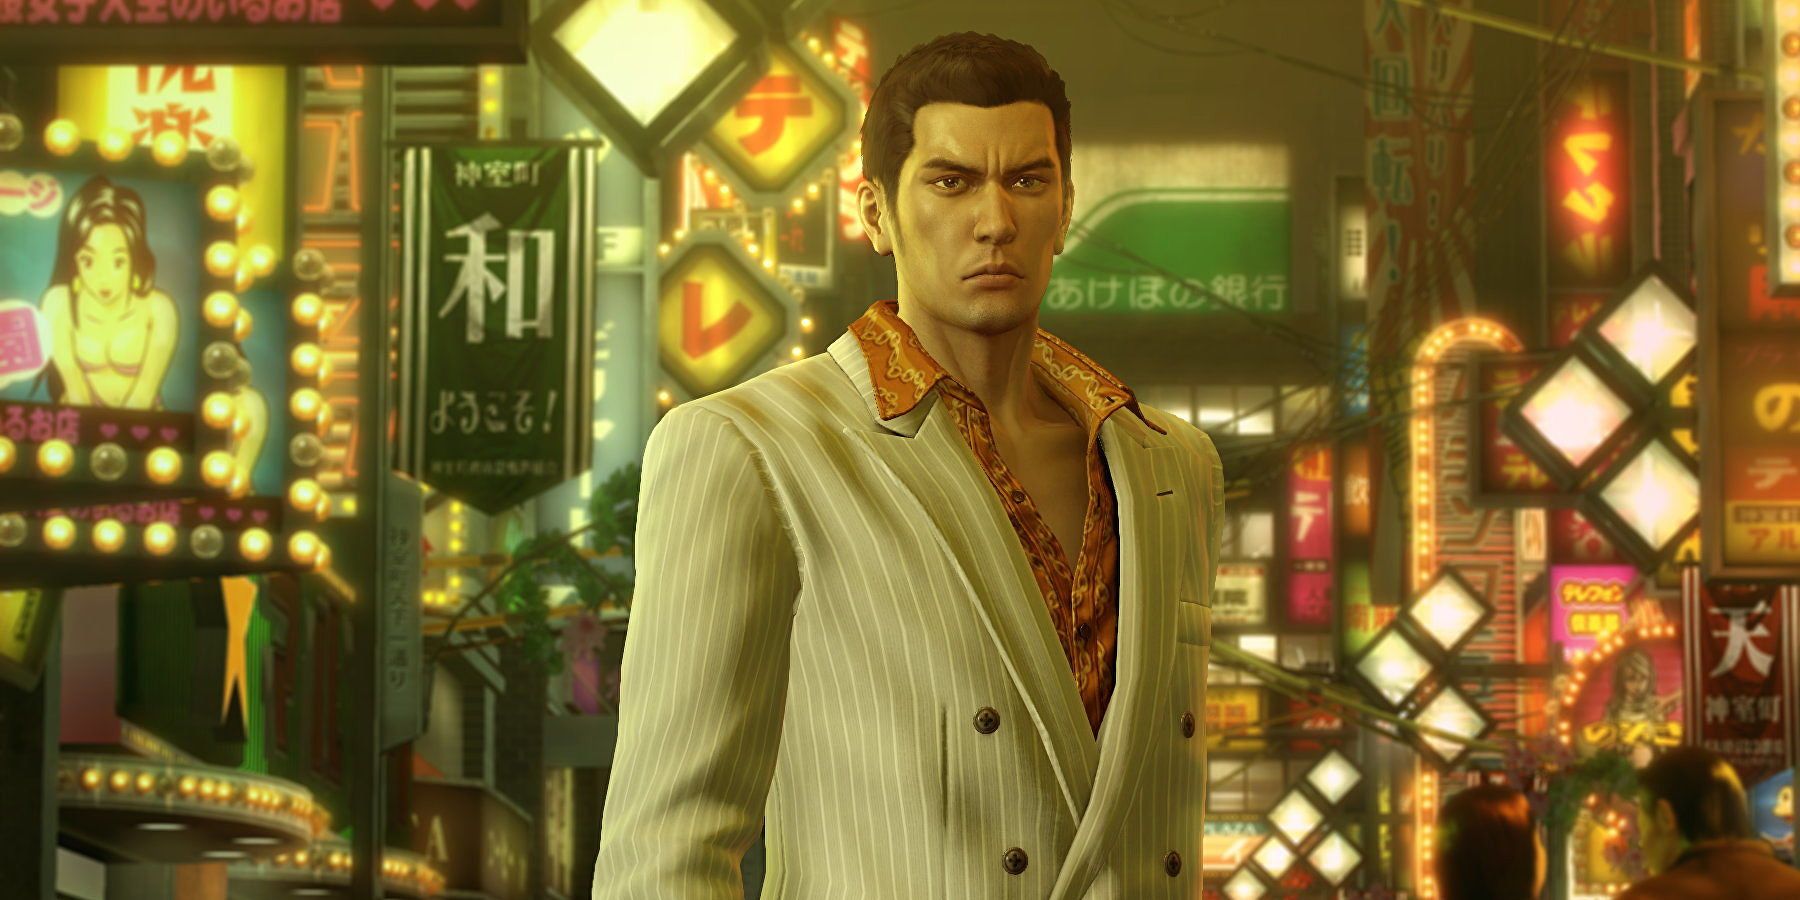 Kiryu with the conic city in the background